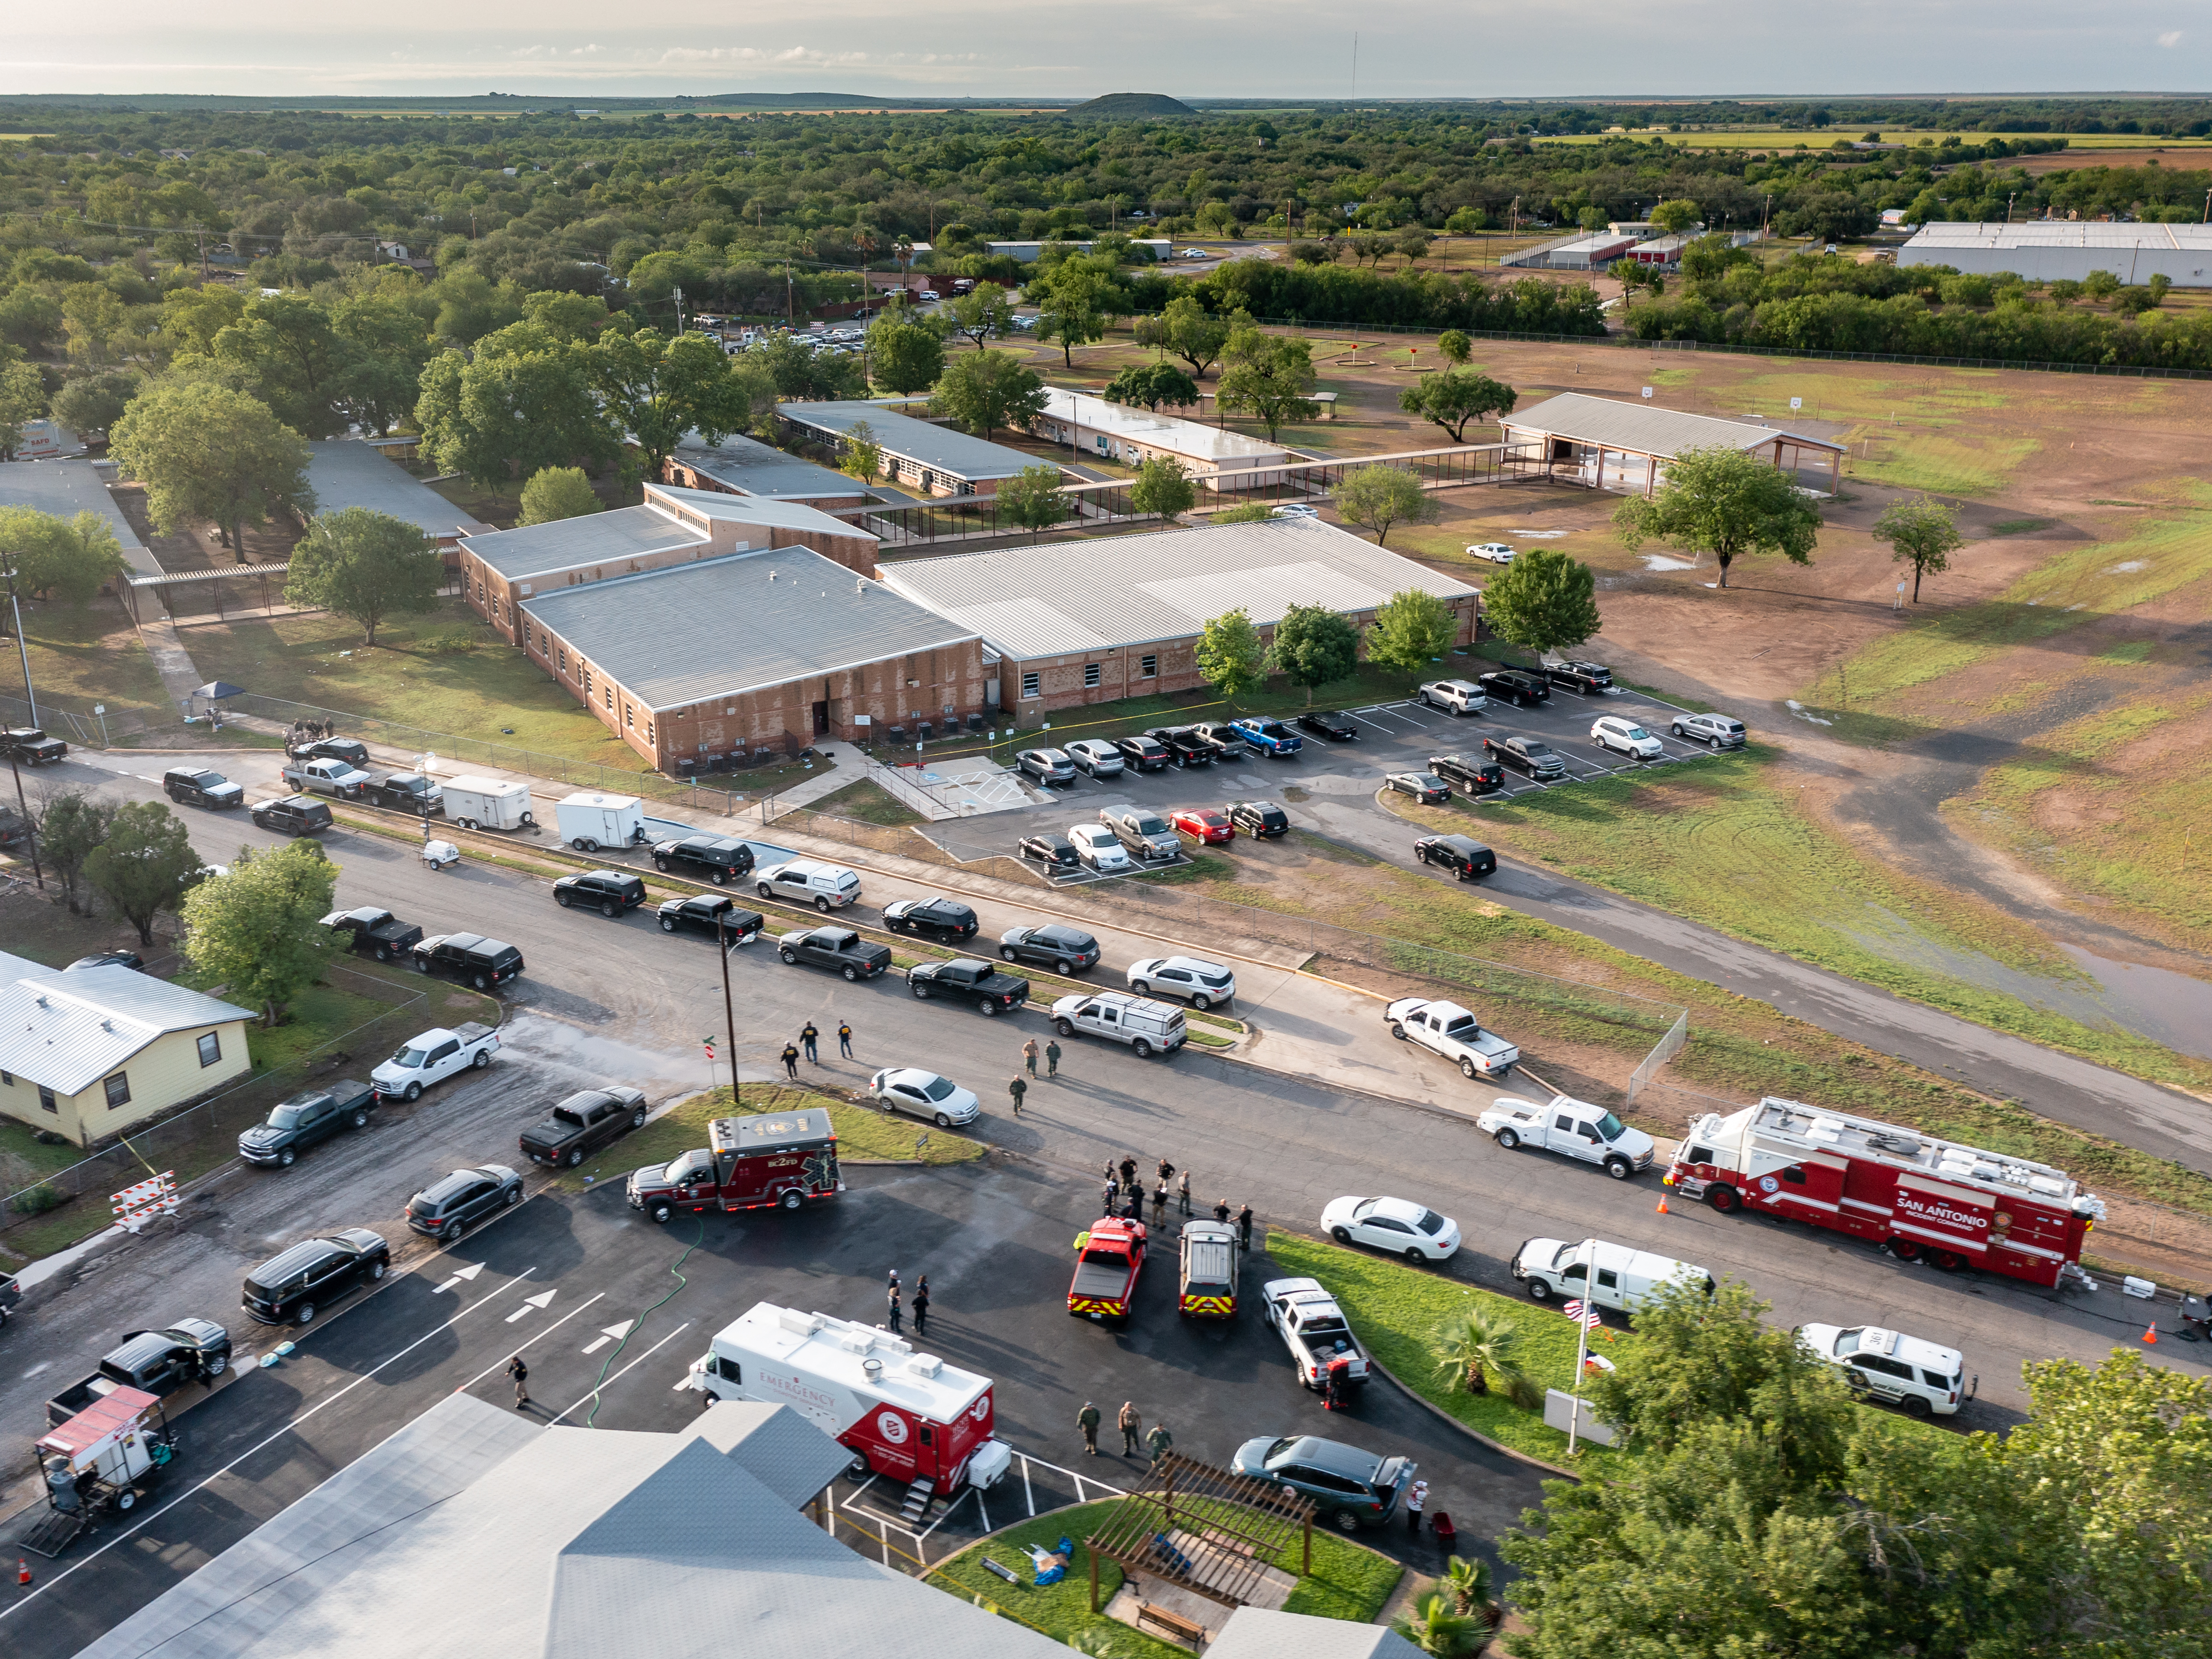 What we know so far about the school shooting in Uvalde, Texas - OPB